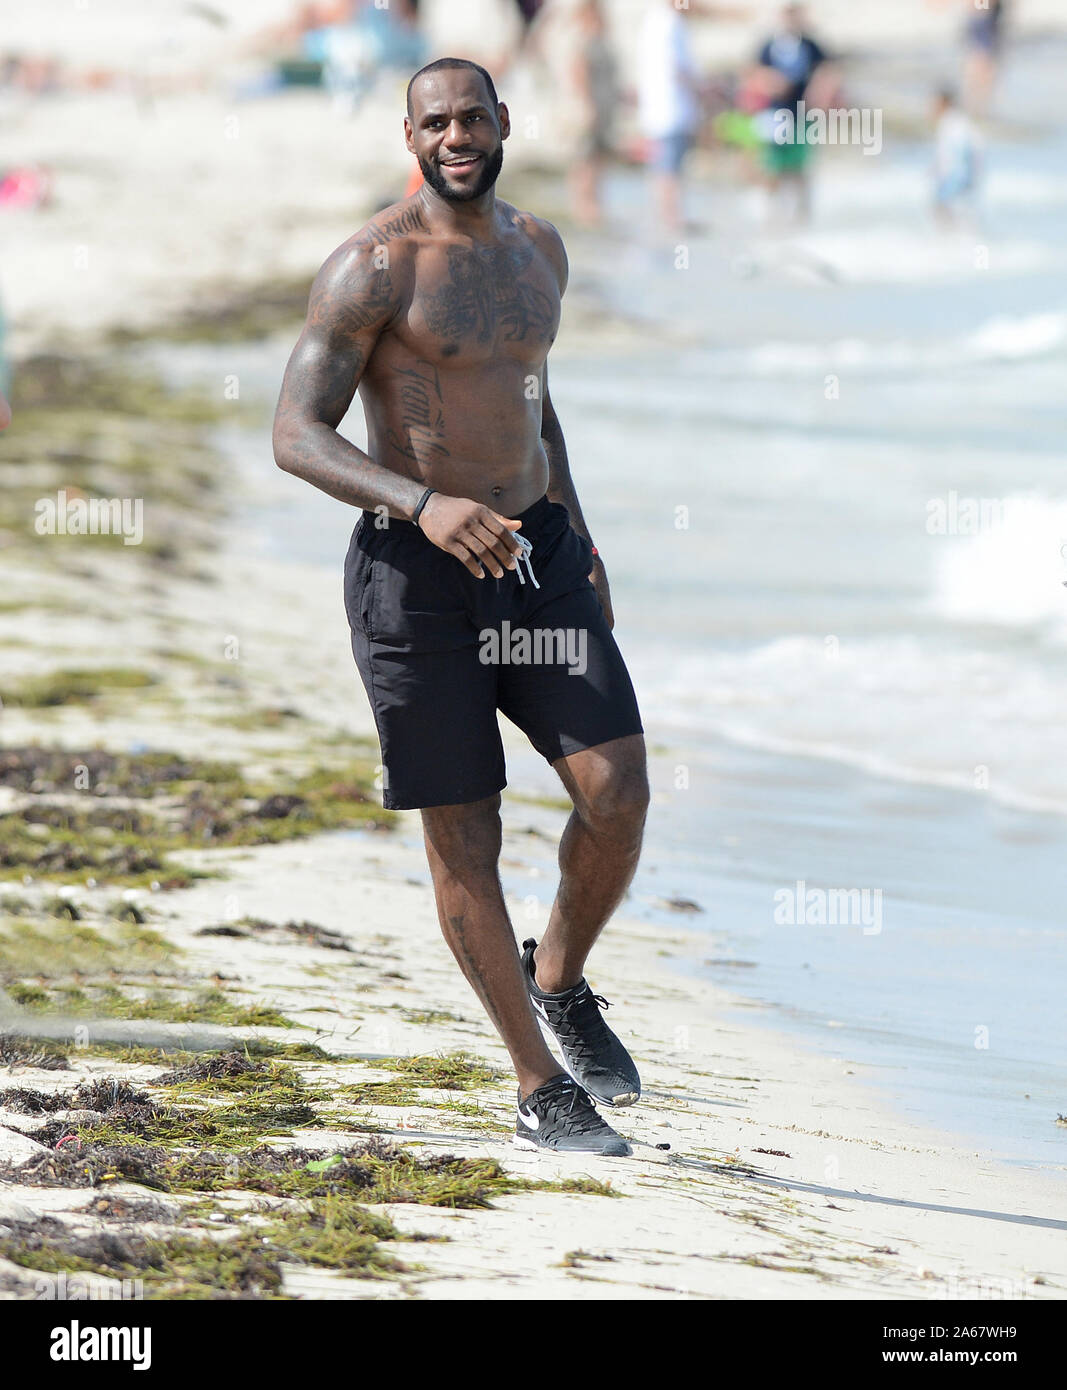 MIAMI BEACH, FL - AUGUST 16: LeBron James showed up on location in Miami  Beach for a Nike commercial. The NBA champion hopped on a bicycle and rode  around the iconic Ocean